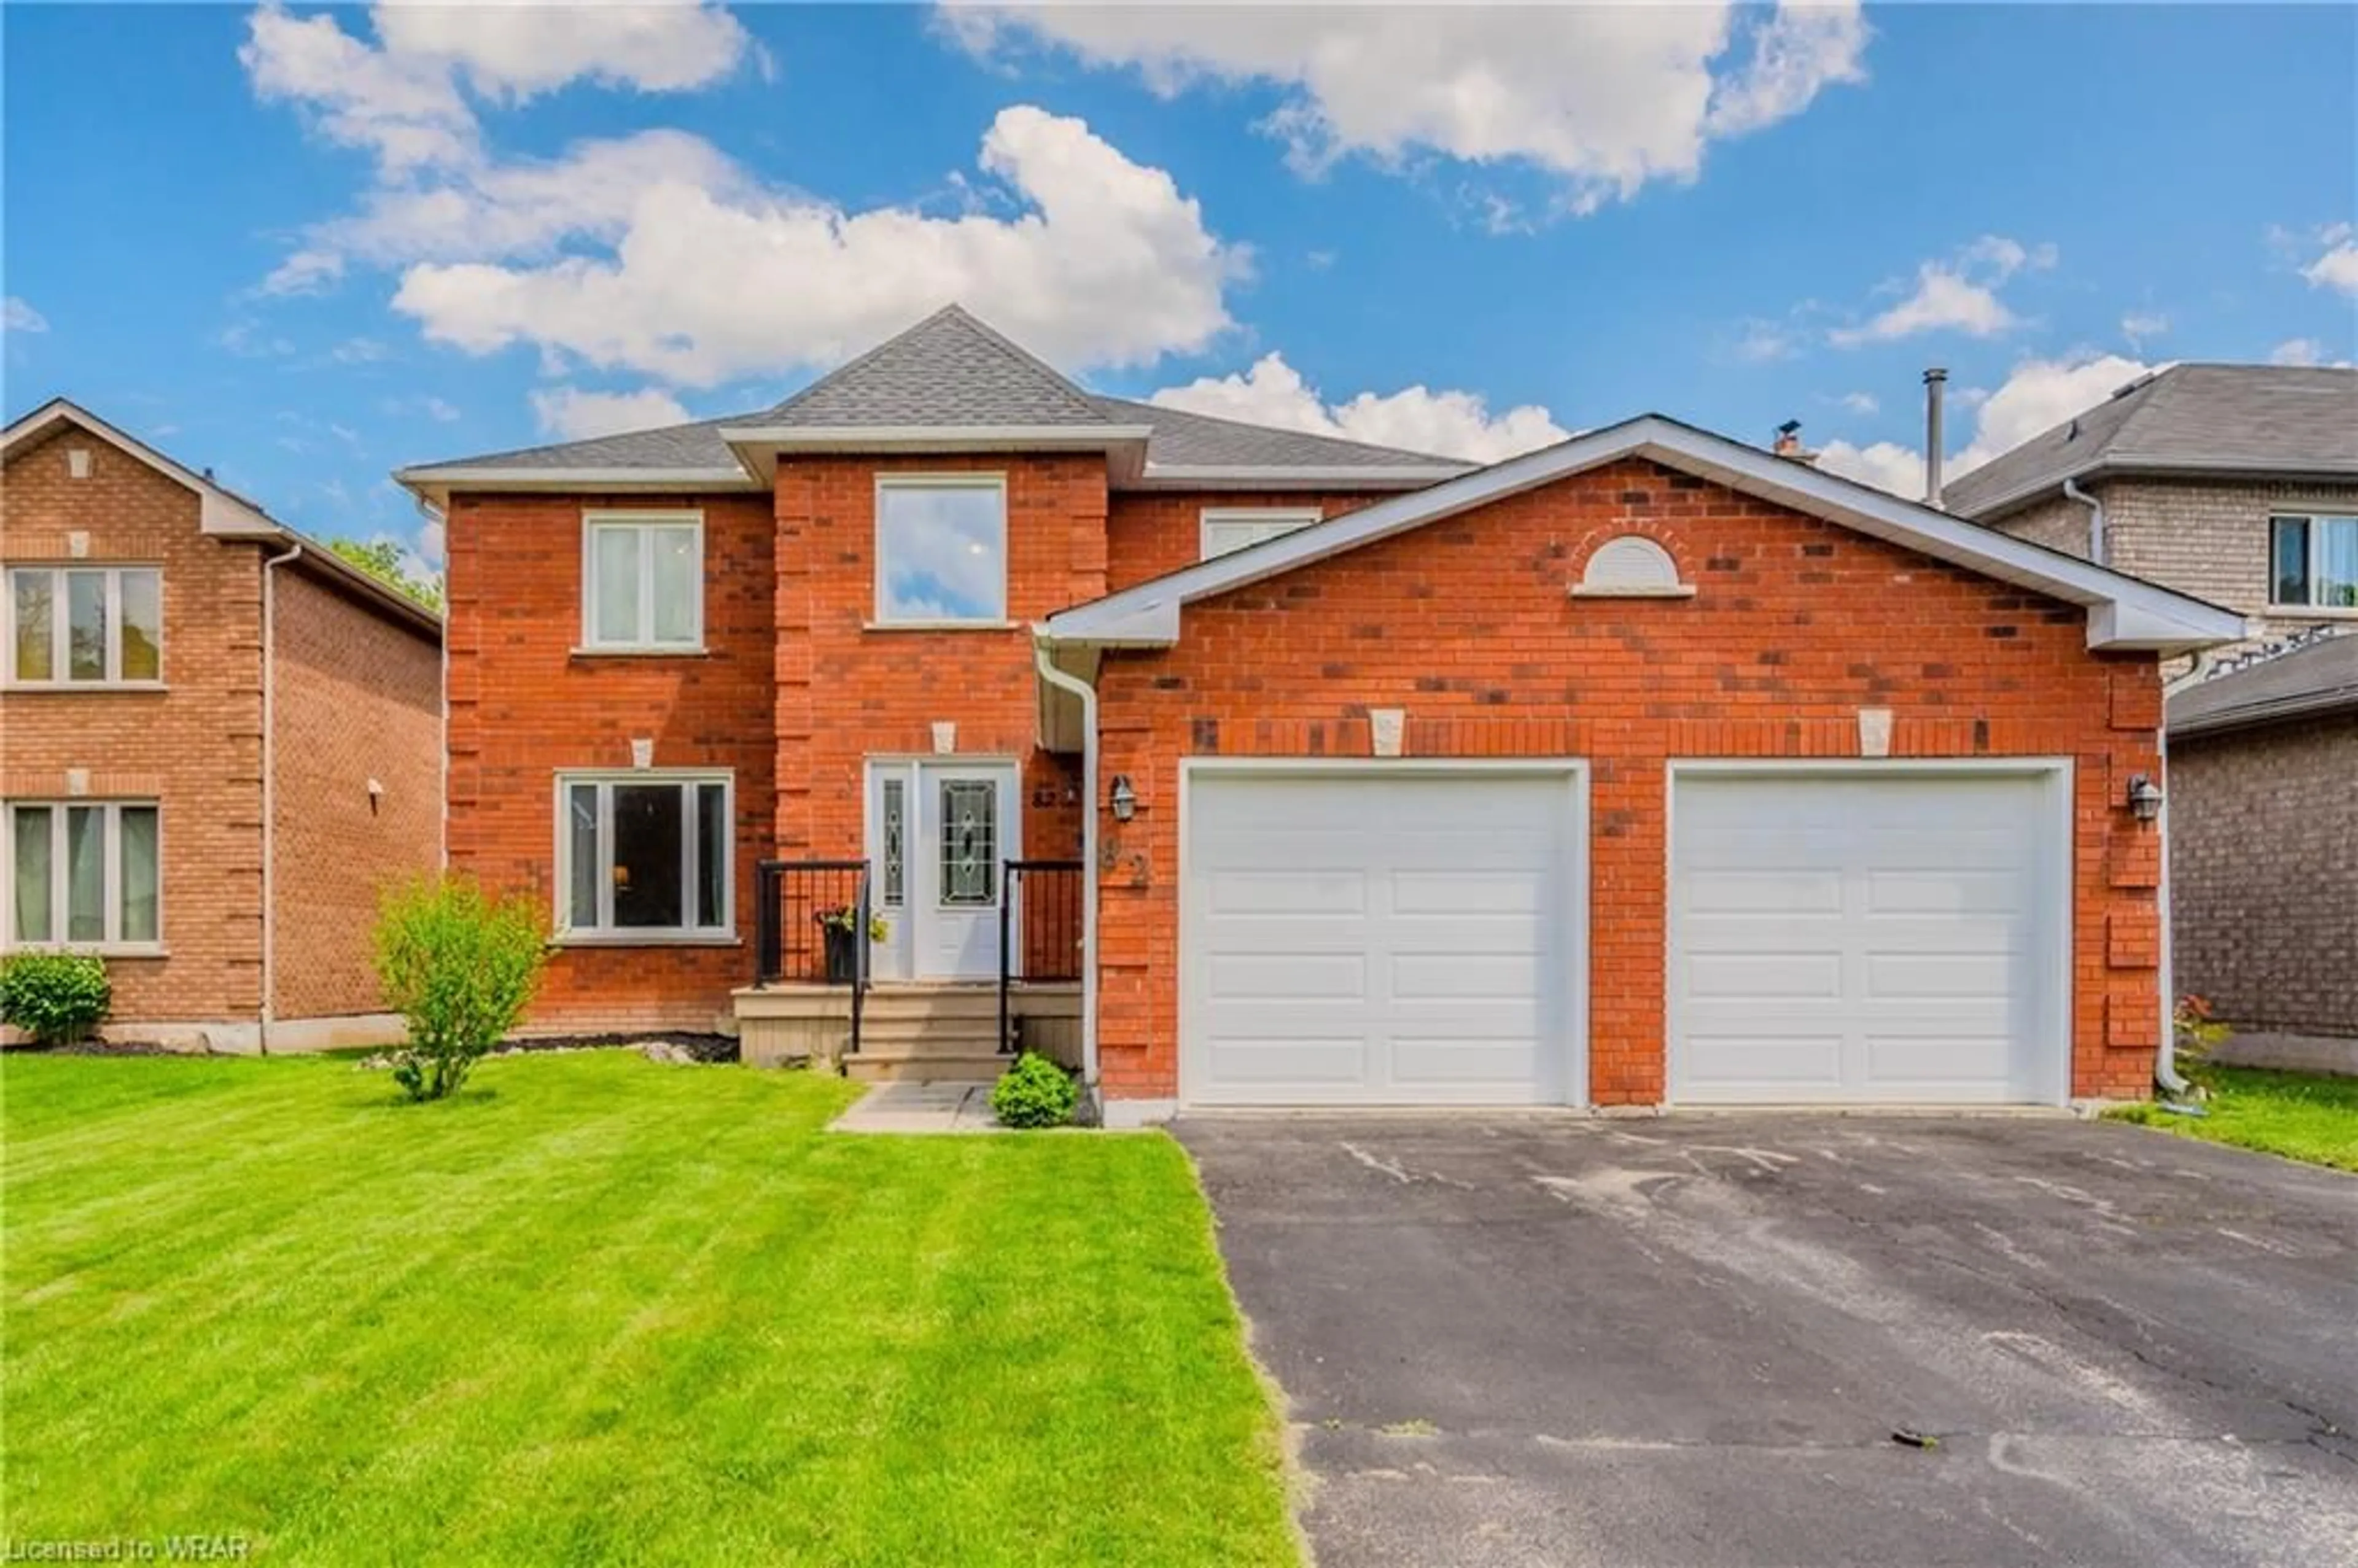 Home with brick exterior material for 82 Lisbon Pines Dr, Cambridge Ontario N1R 8A1